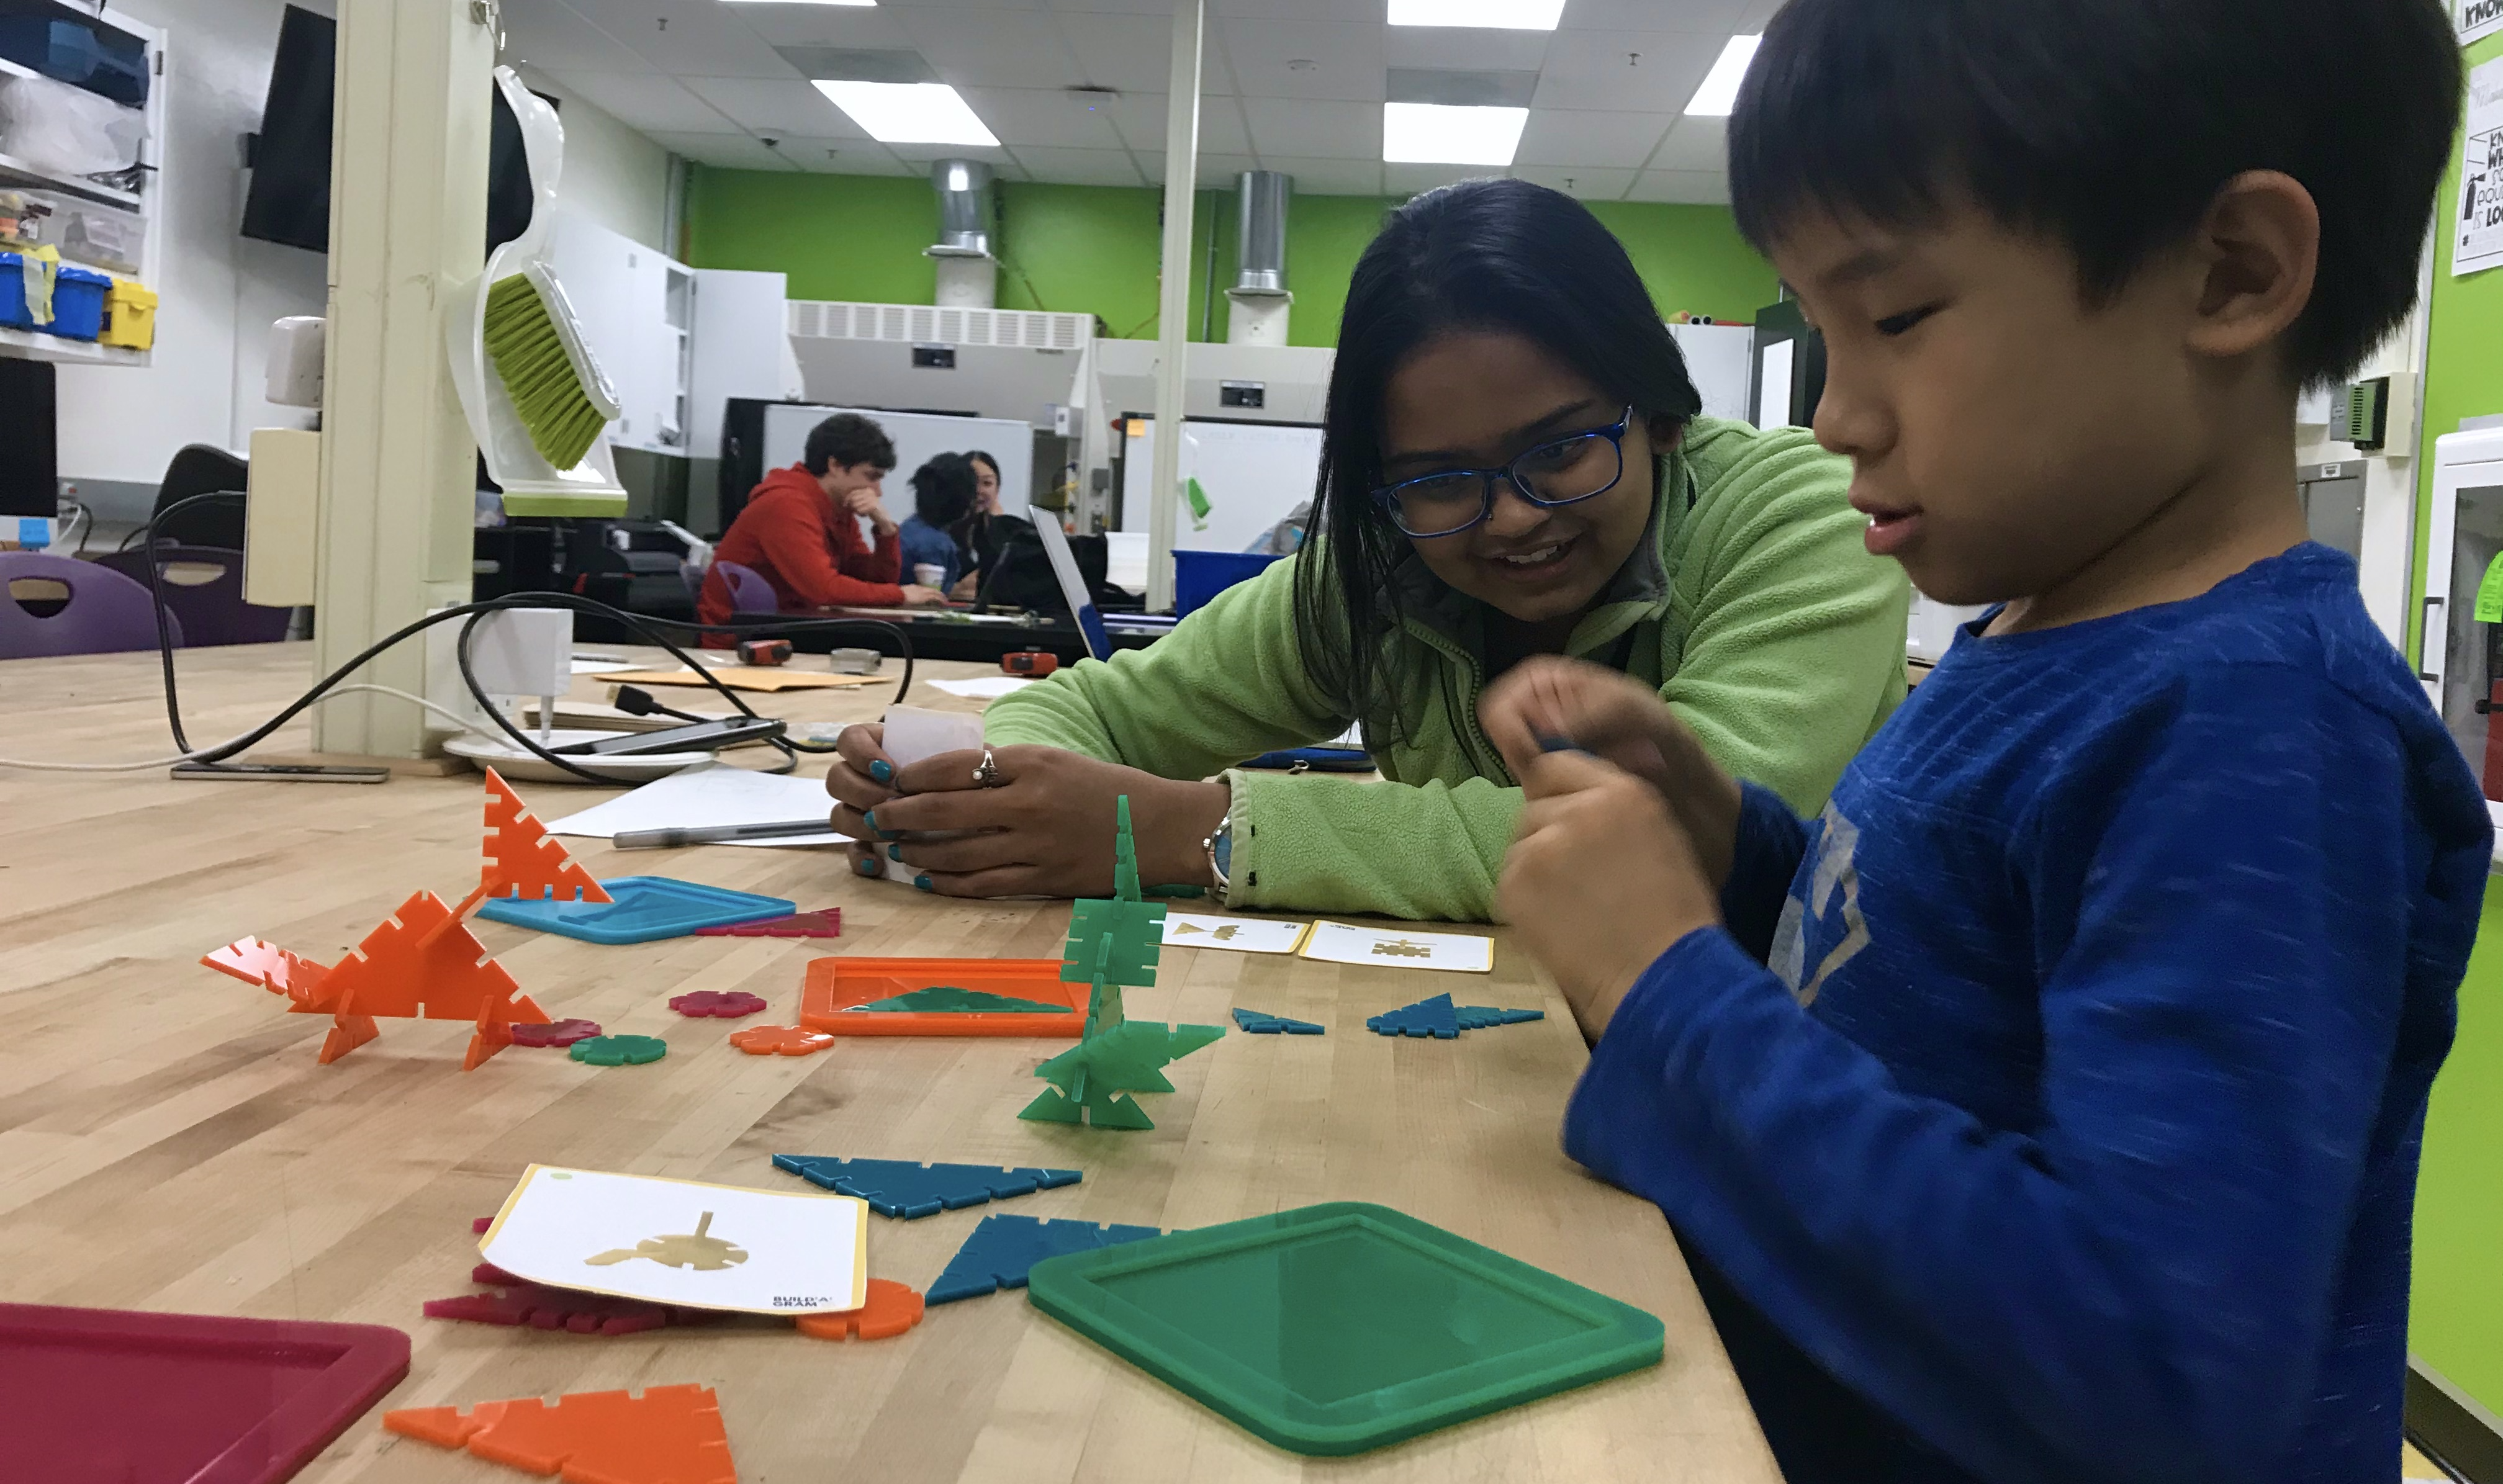 A young Asian boy and south Asian woman play-testing with colorful geometric pieces.